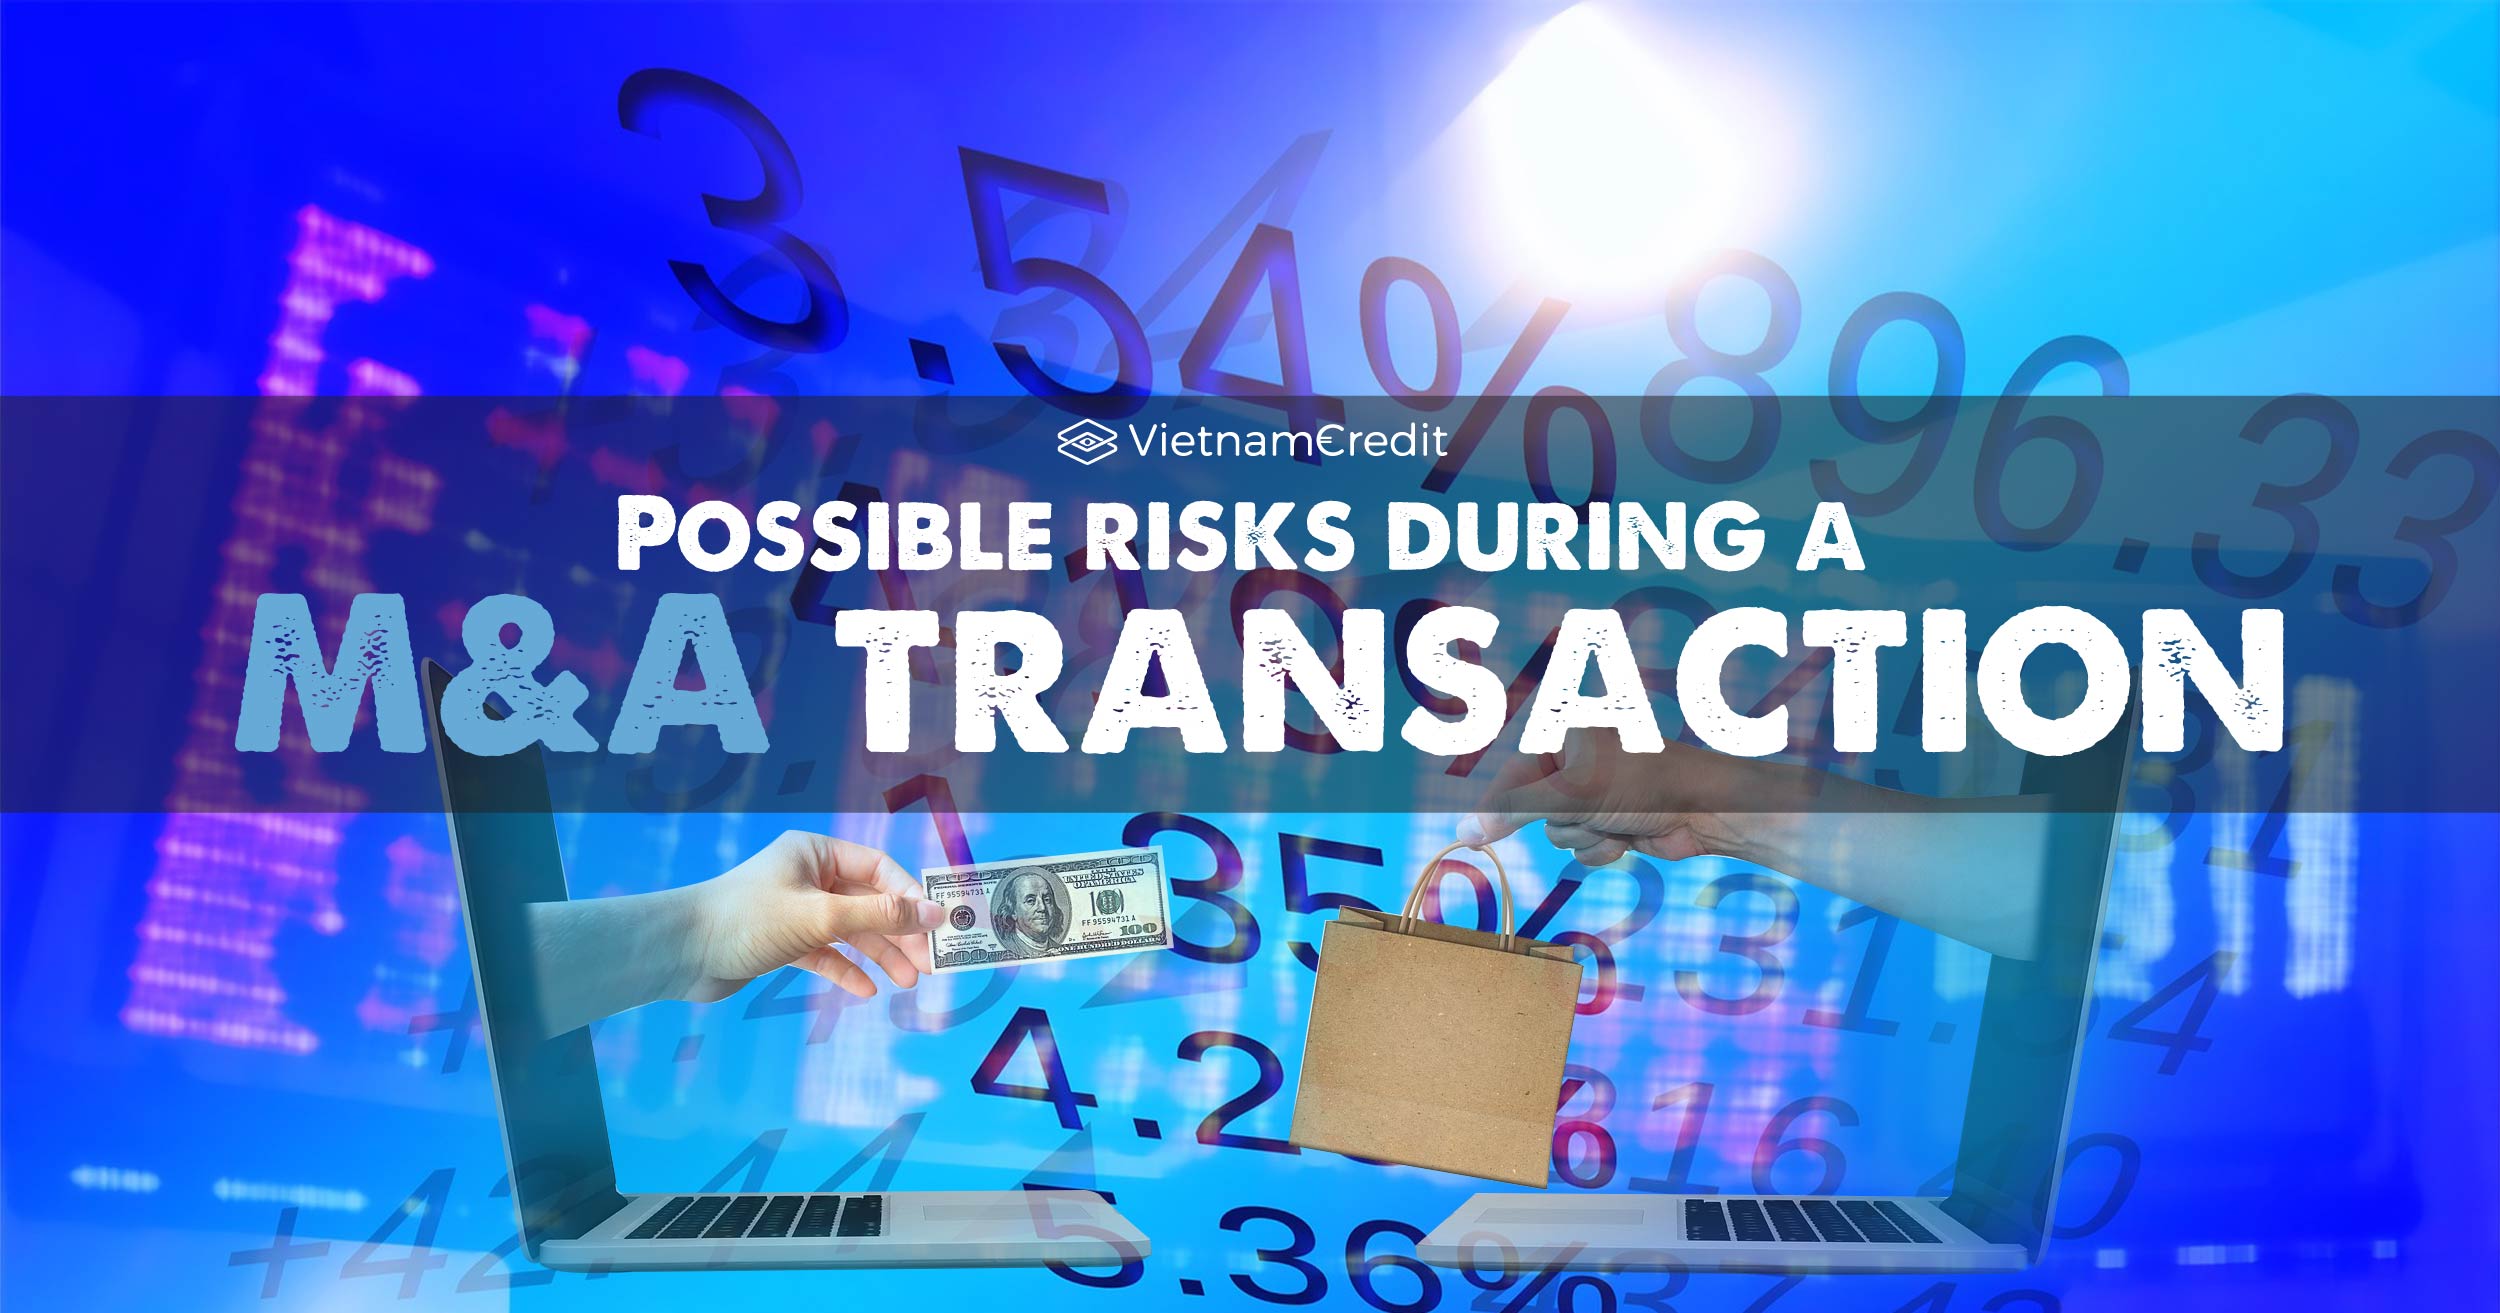 Possible risks during an M&A transaction